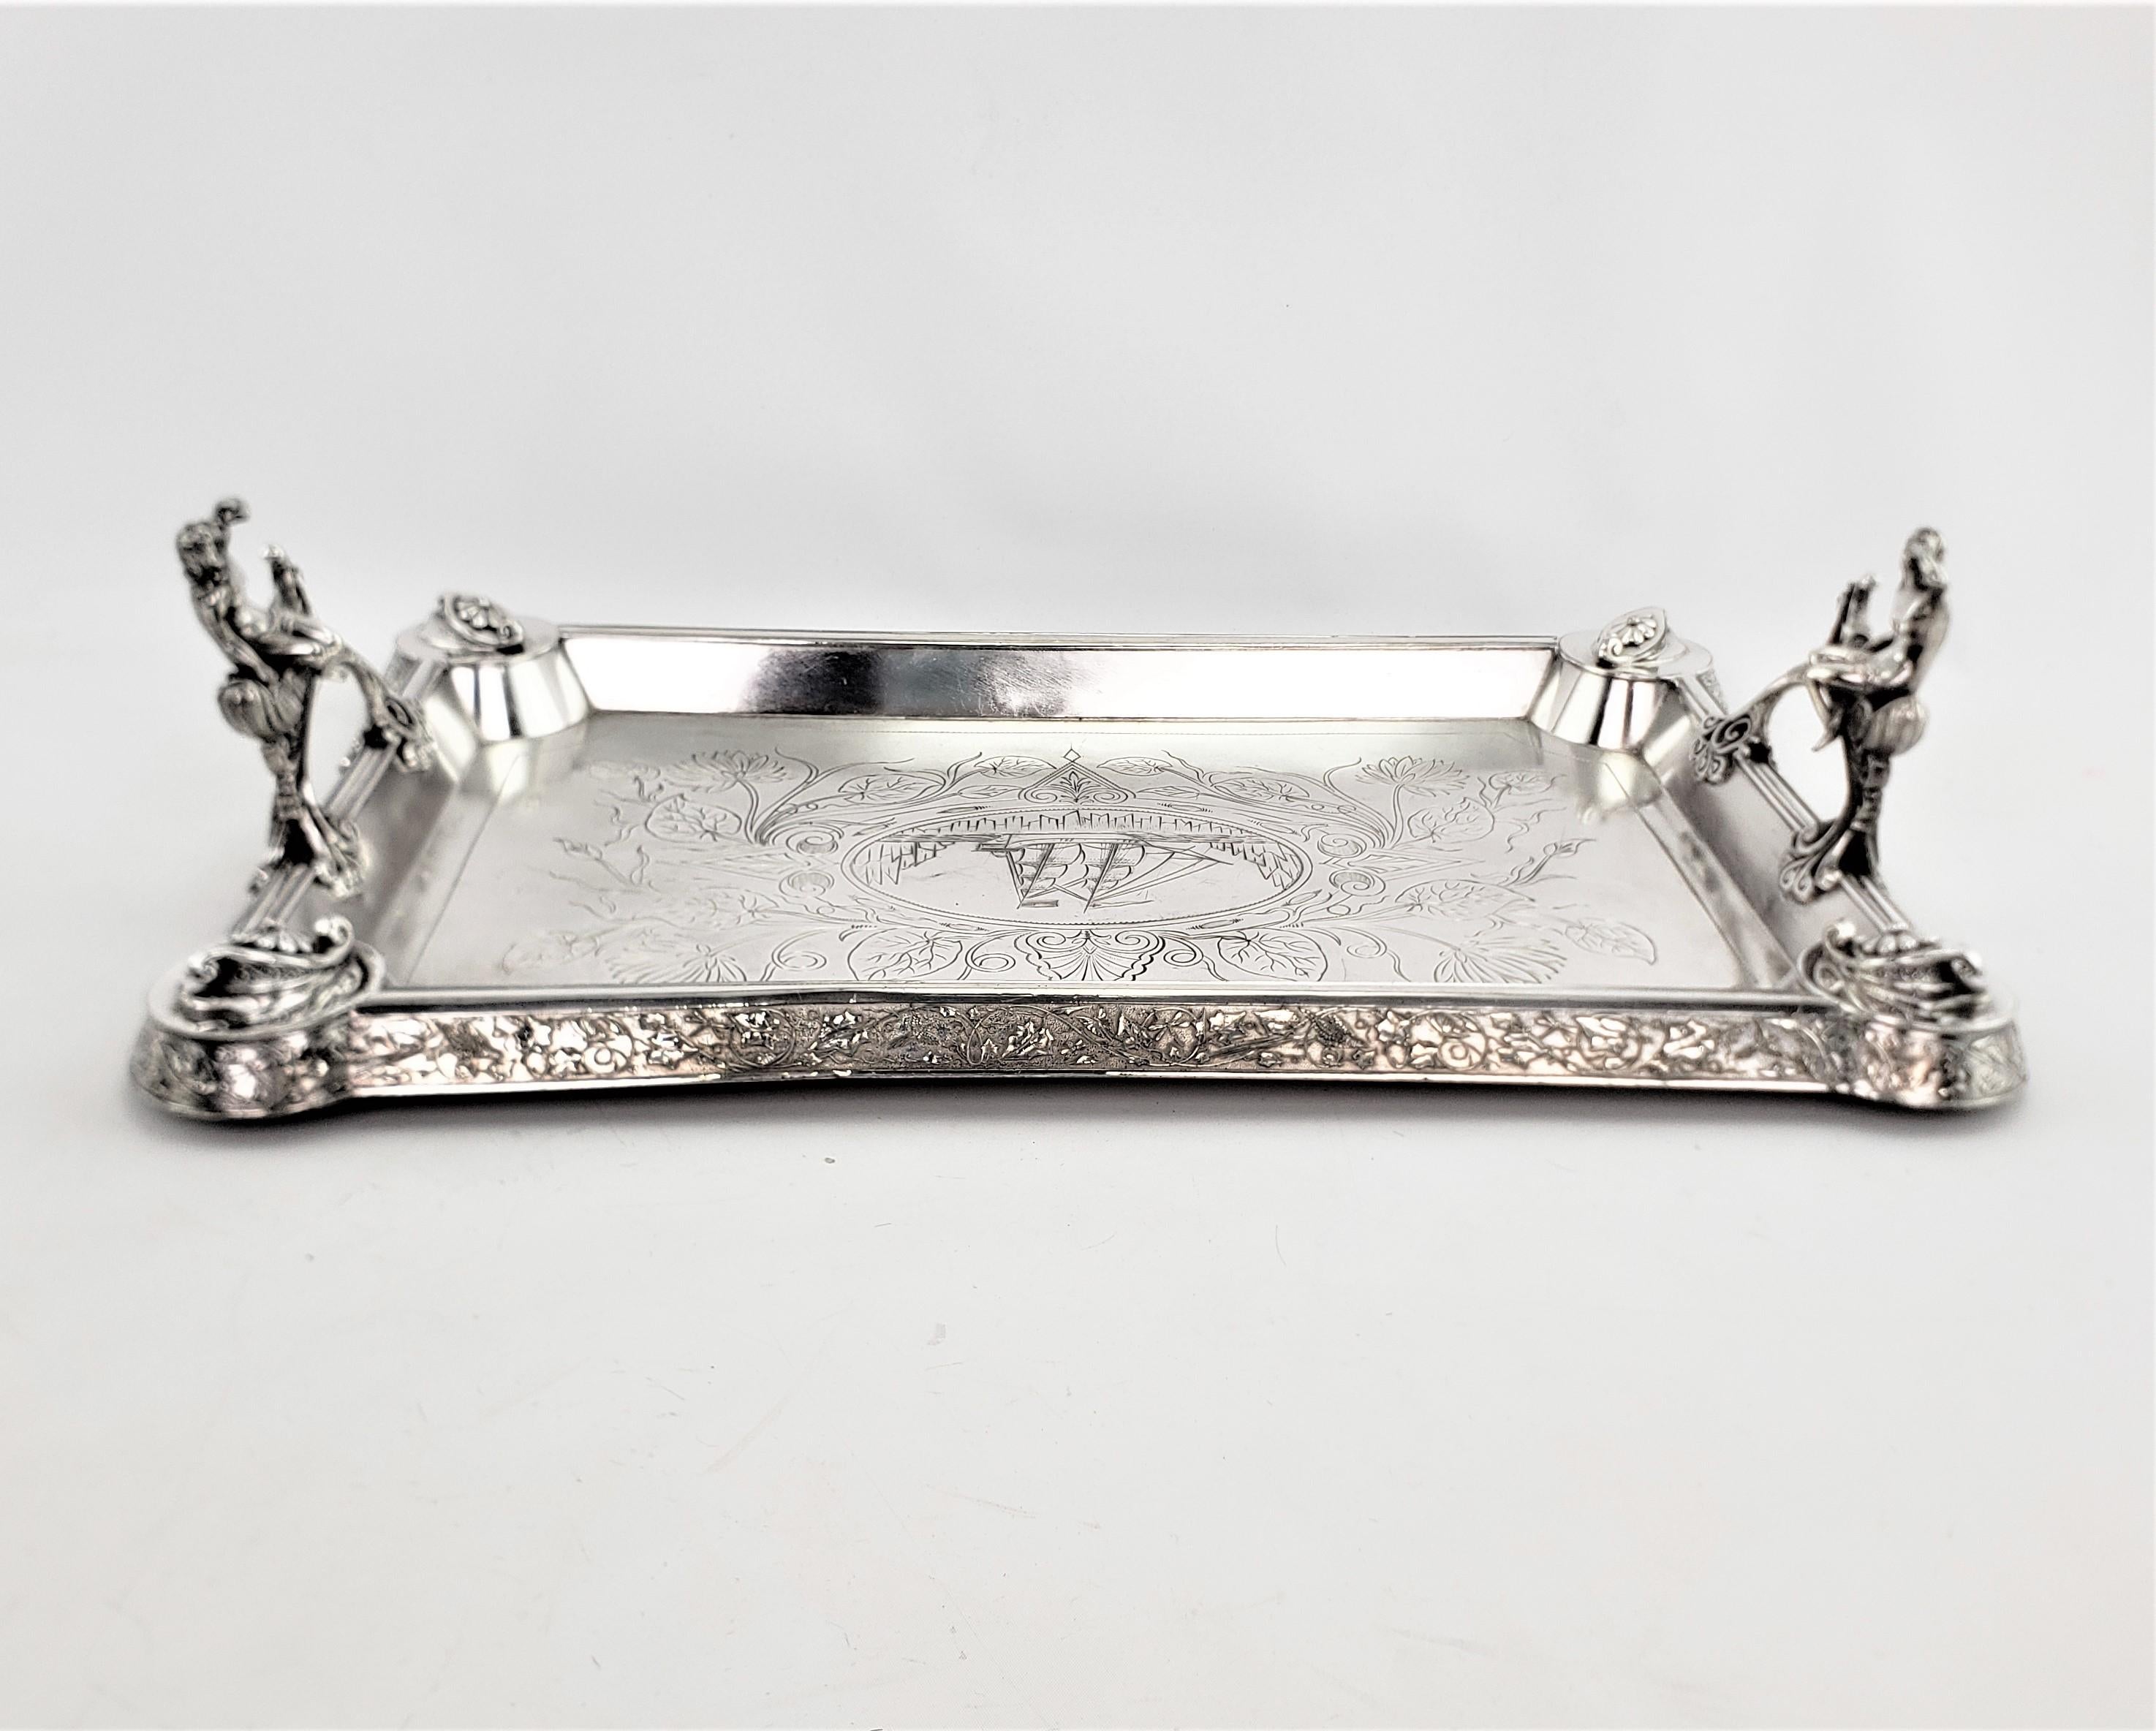 Antique Aesthetic Movement Silver Plated Serving Tray with Figural Siren Handles In Good Condition For Sale In Hamilton, Ontario